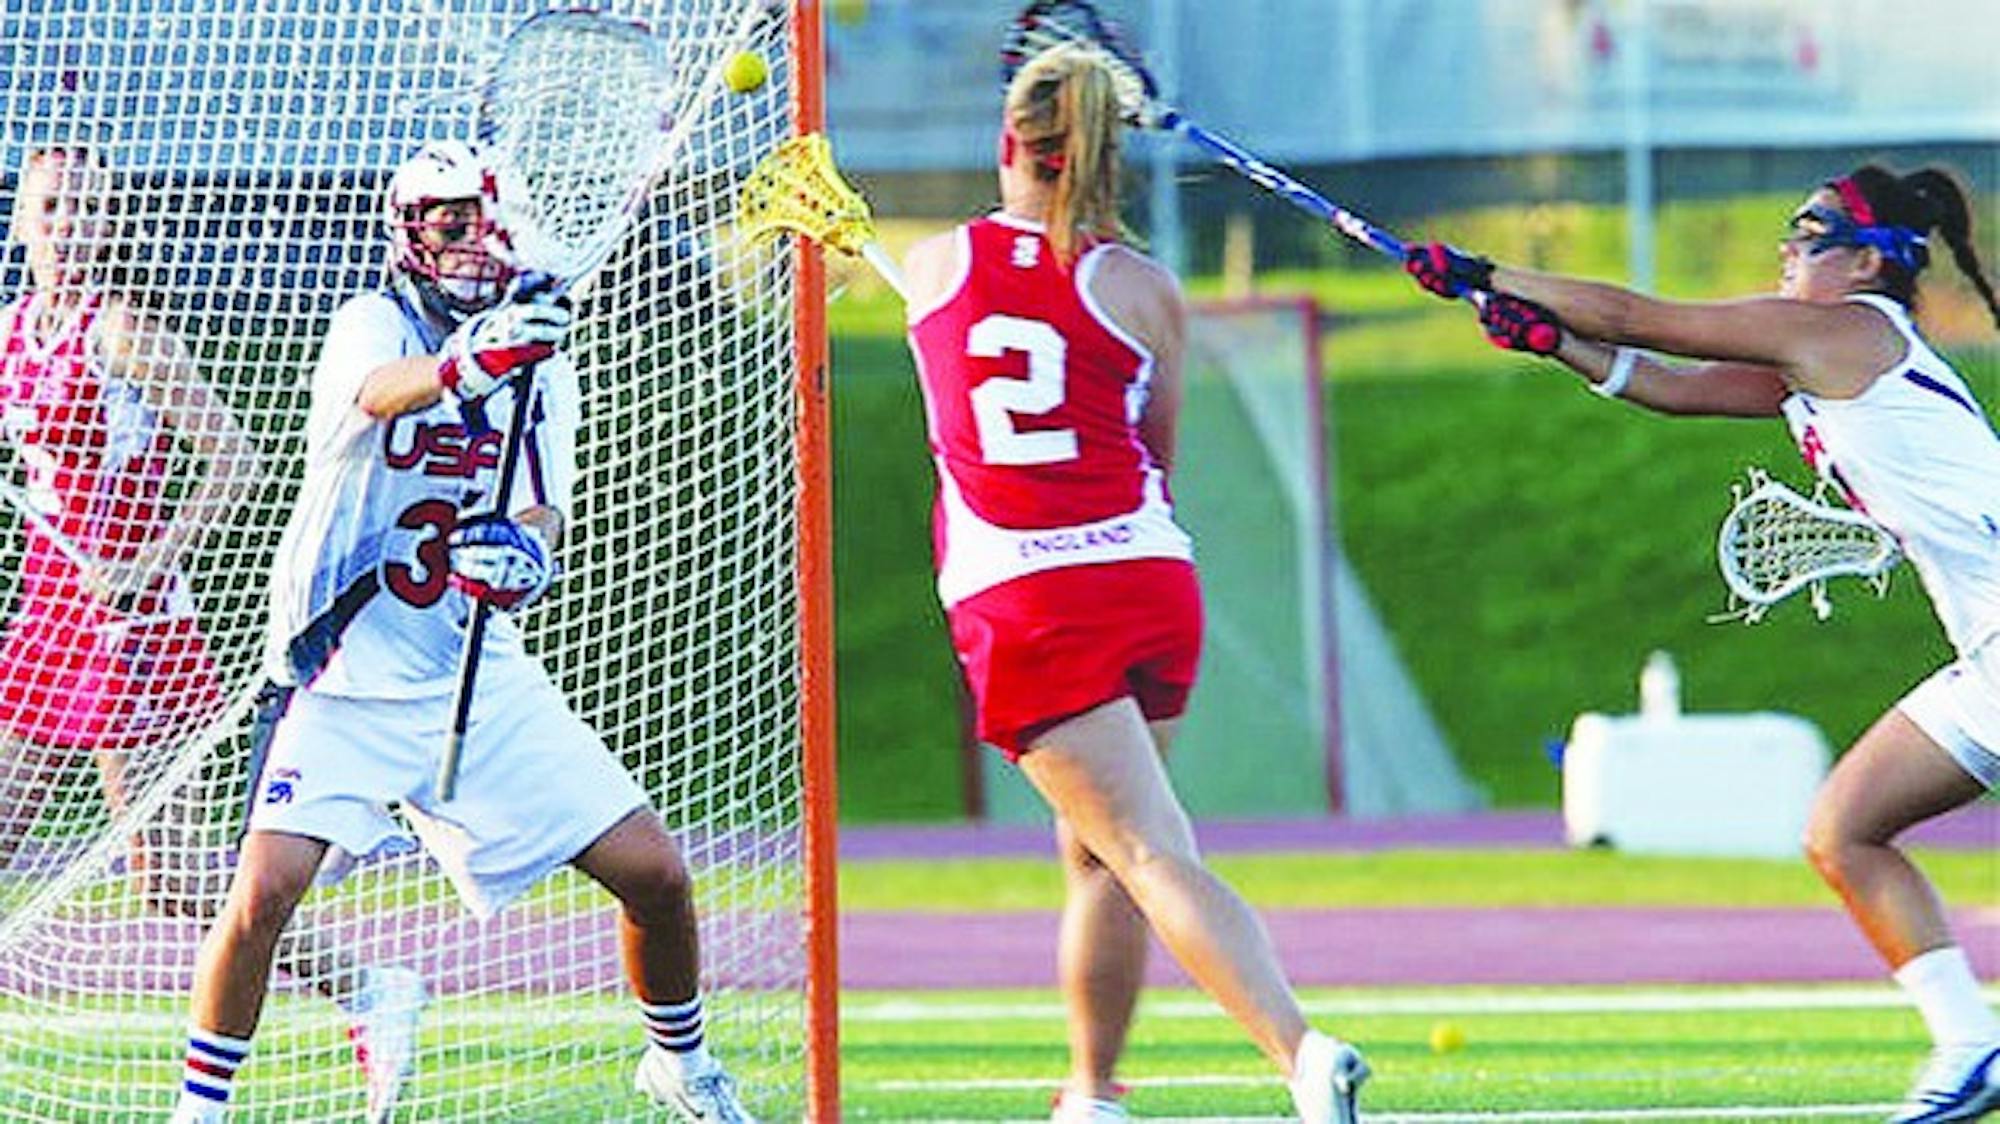 Devon Wills '06 defends the U.S. team's cage during the 2013 women's lacrosse World Cup. Julia Szafman '13 goal tended for team Israel.